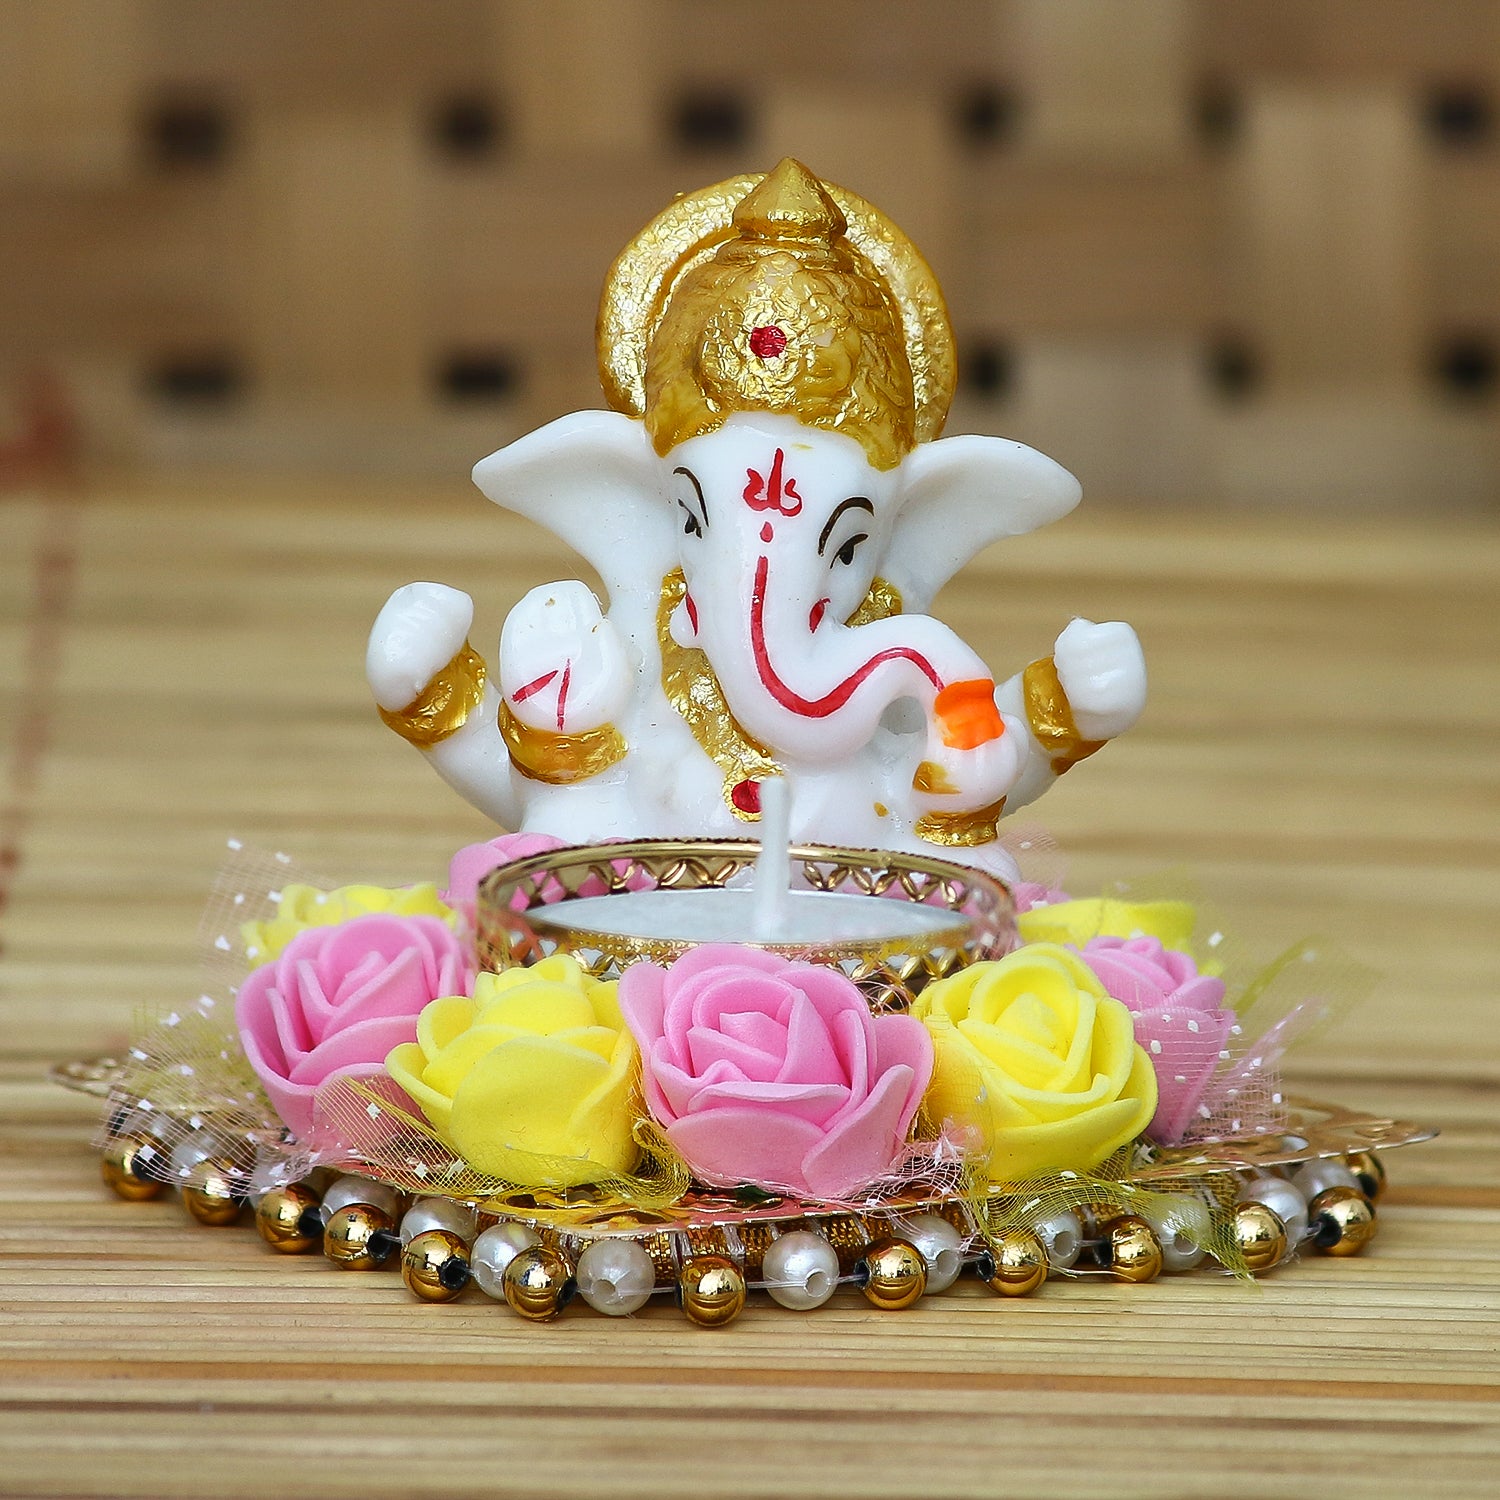 Polyresin Lord Ganesha Idol on Decorative Metal Plate with Tea Light Holder (Pink, Yellow and White)